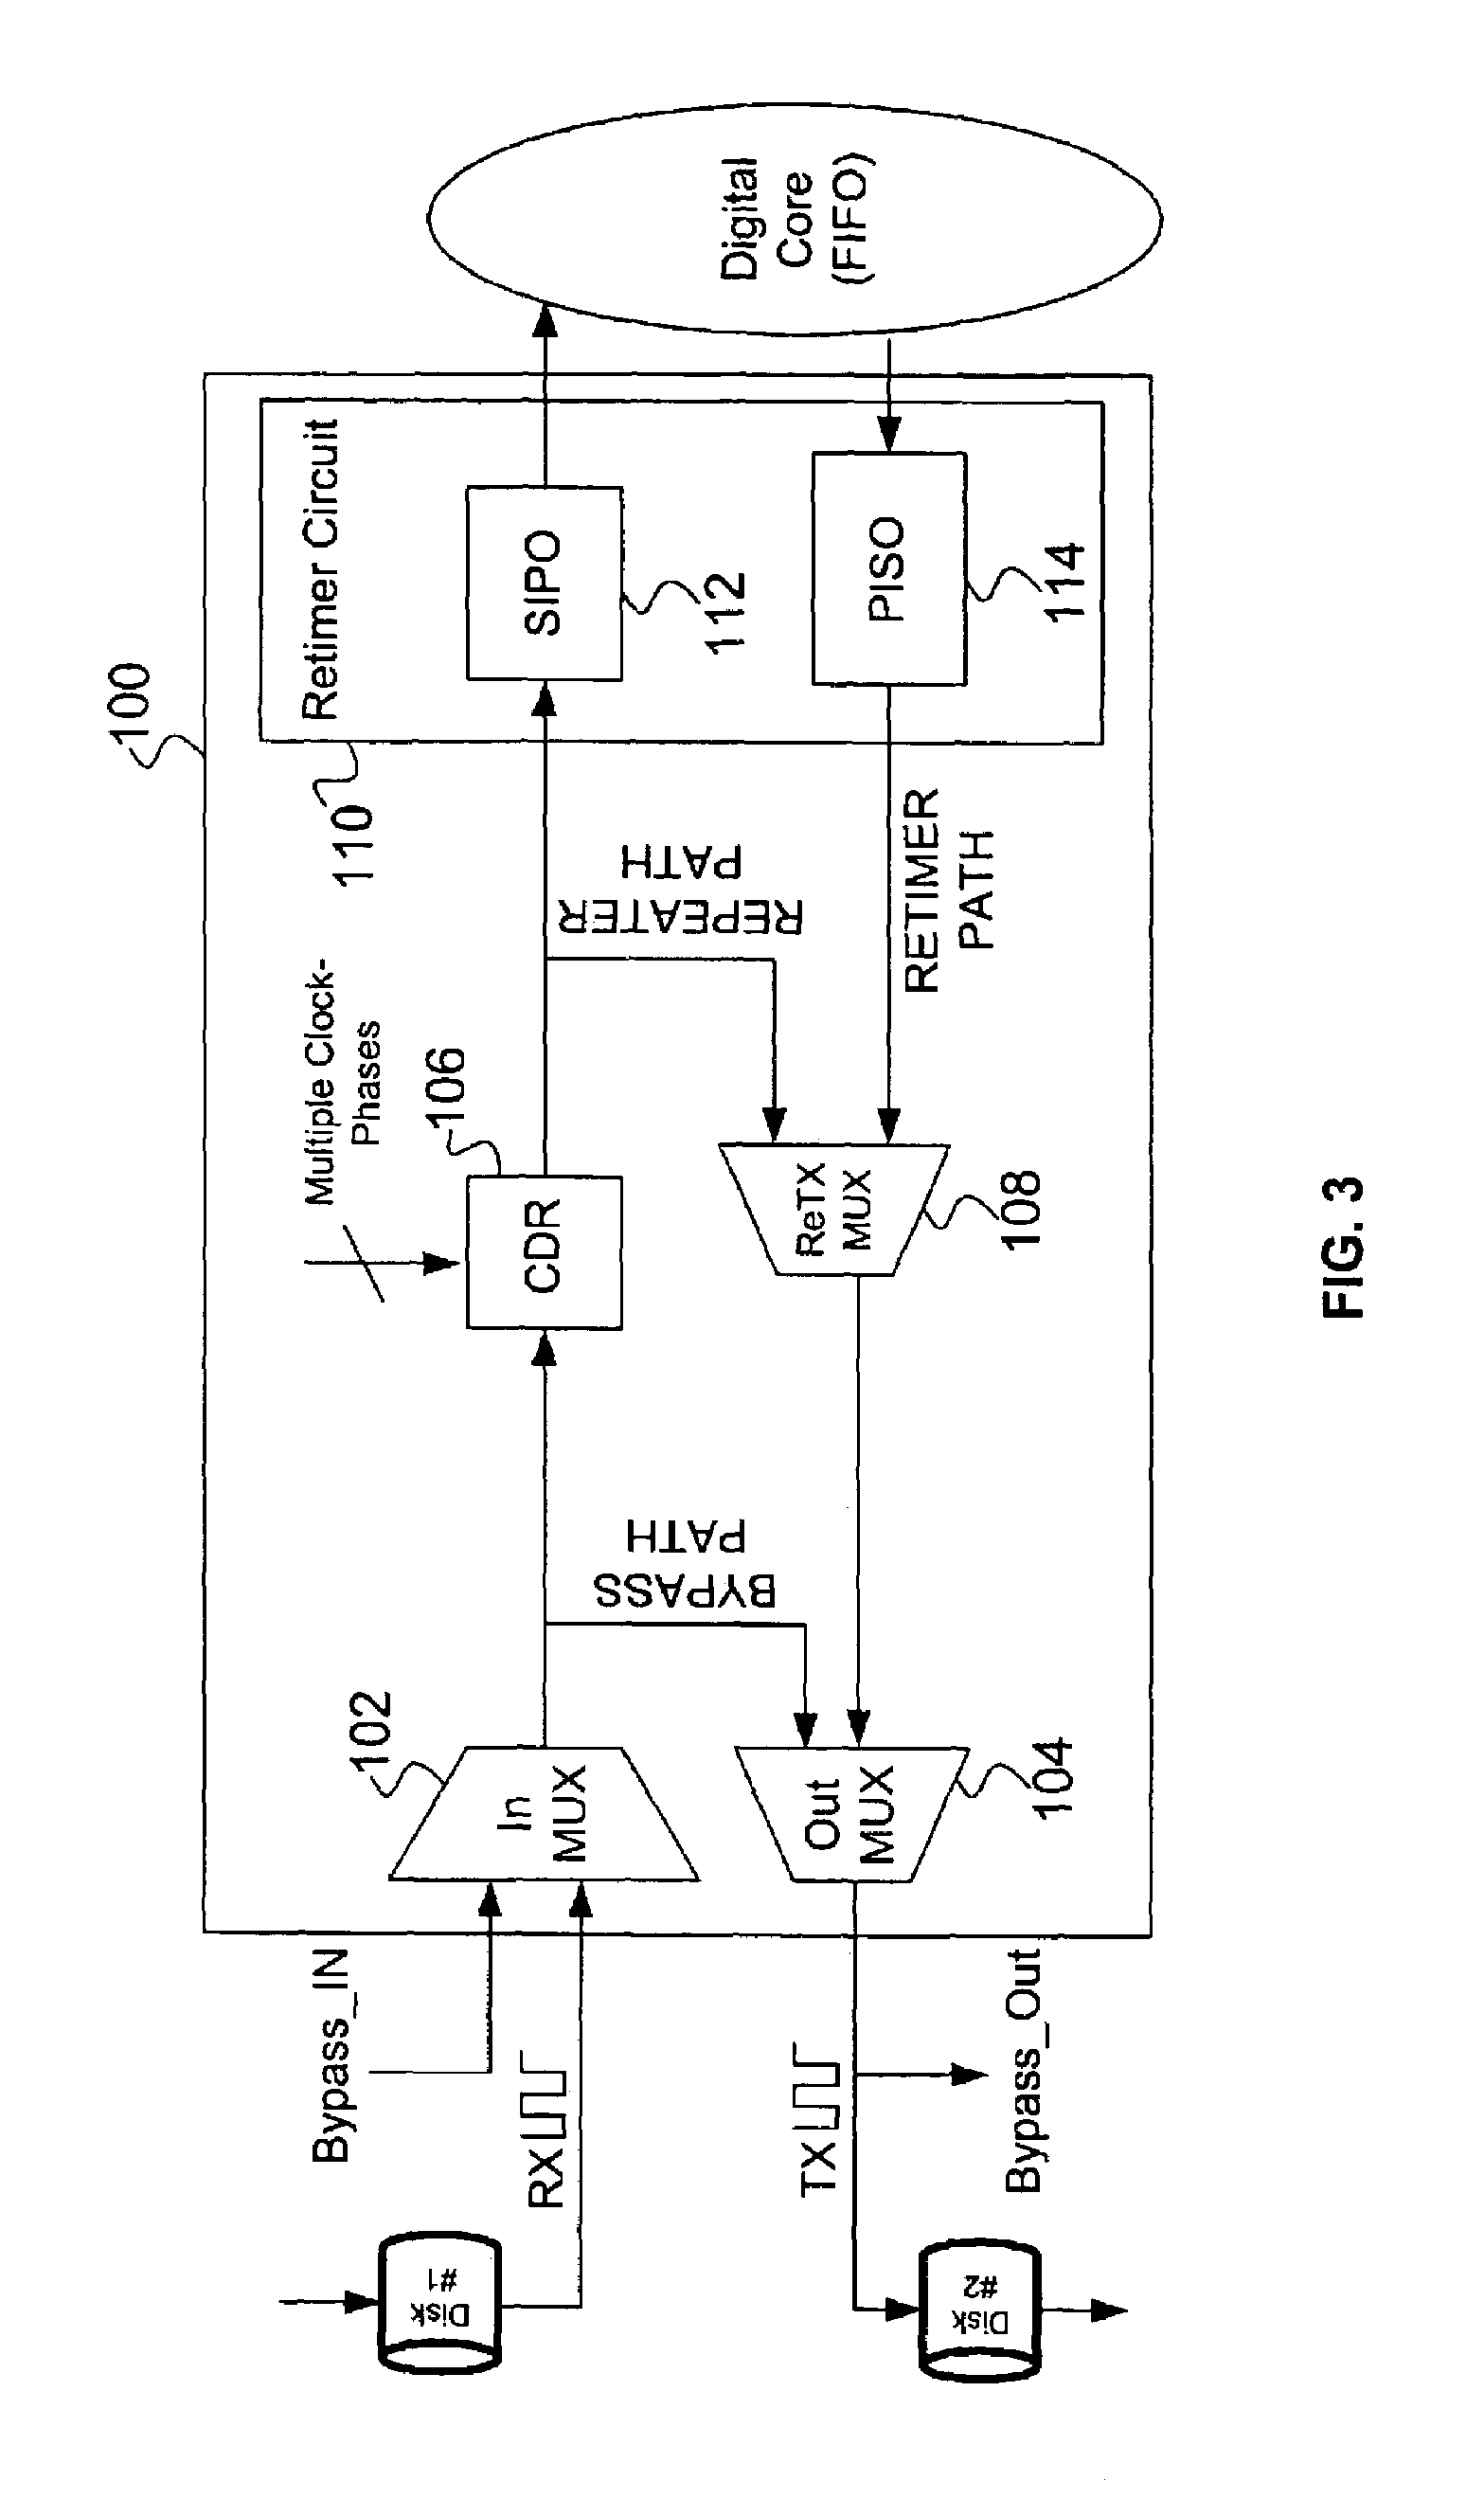 Multi-function bypass port and port bypass circuit